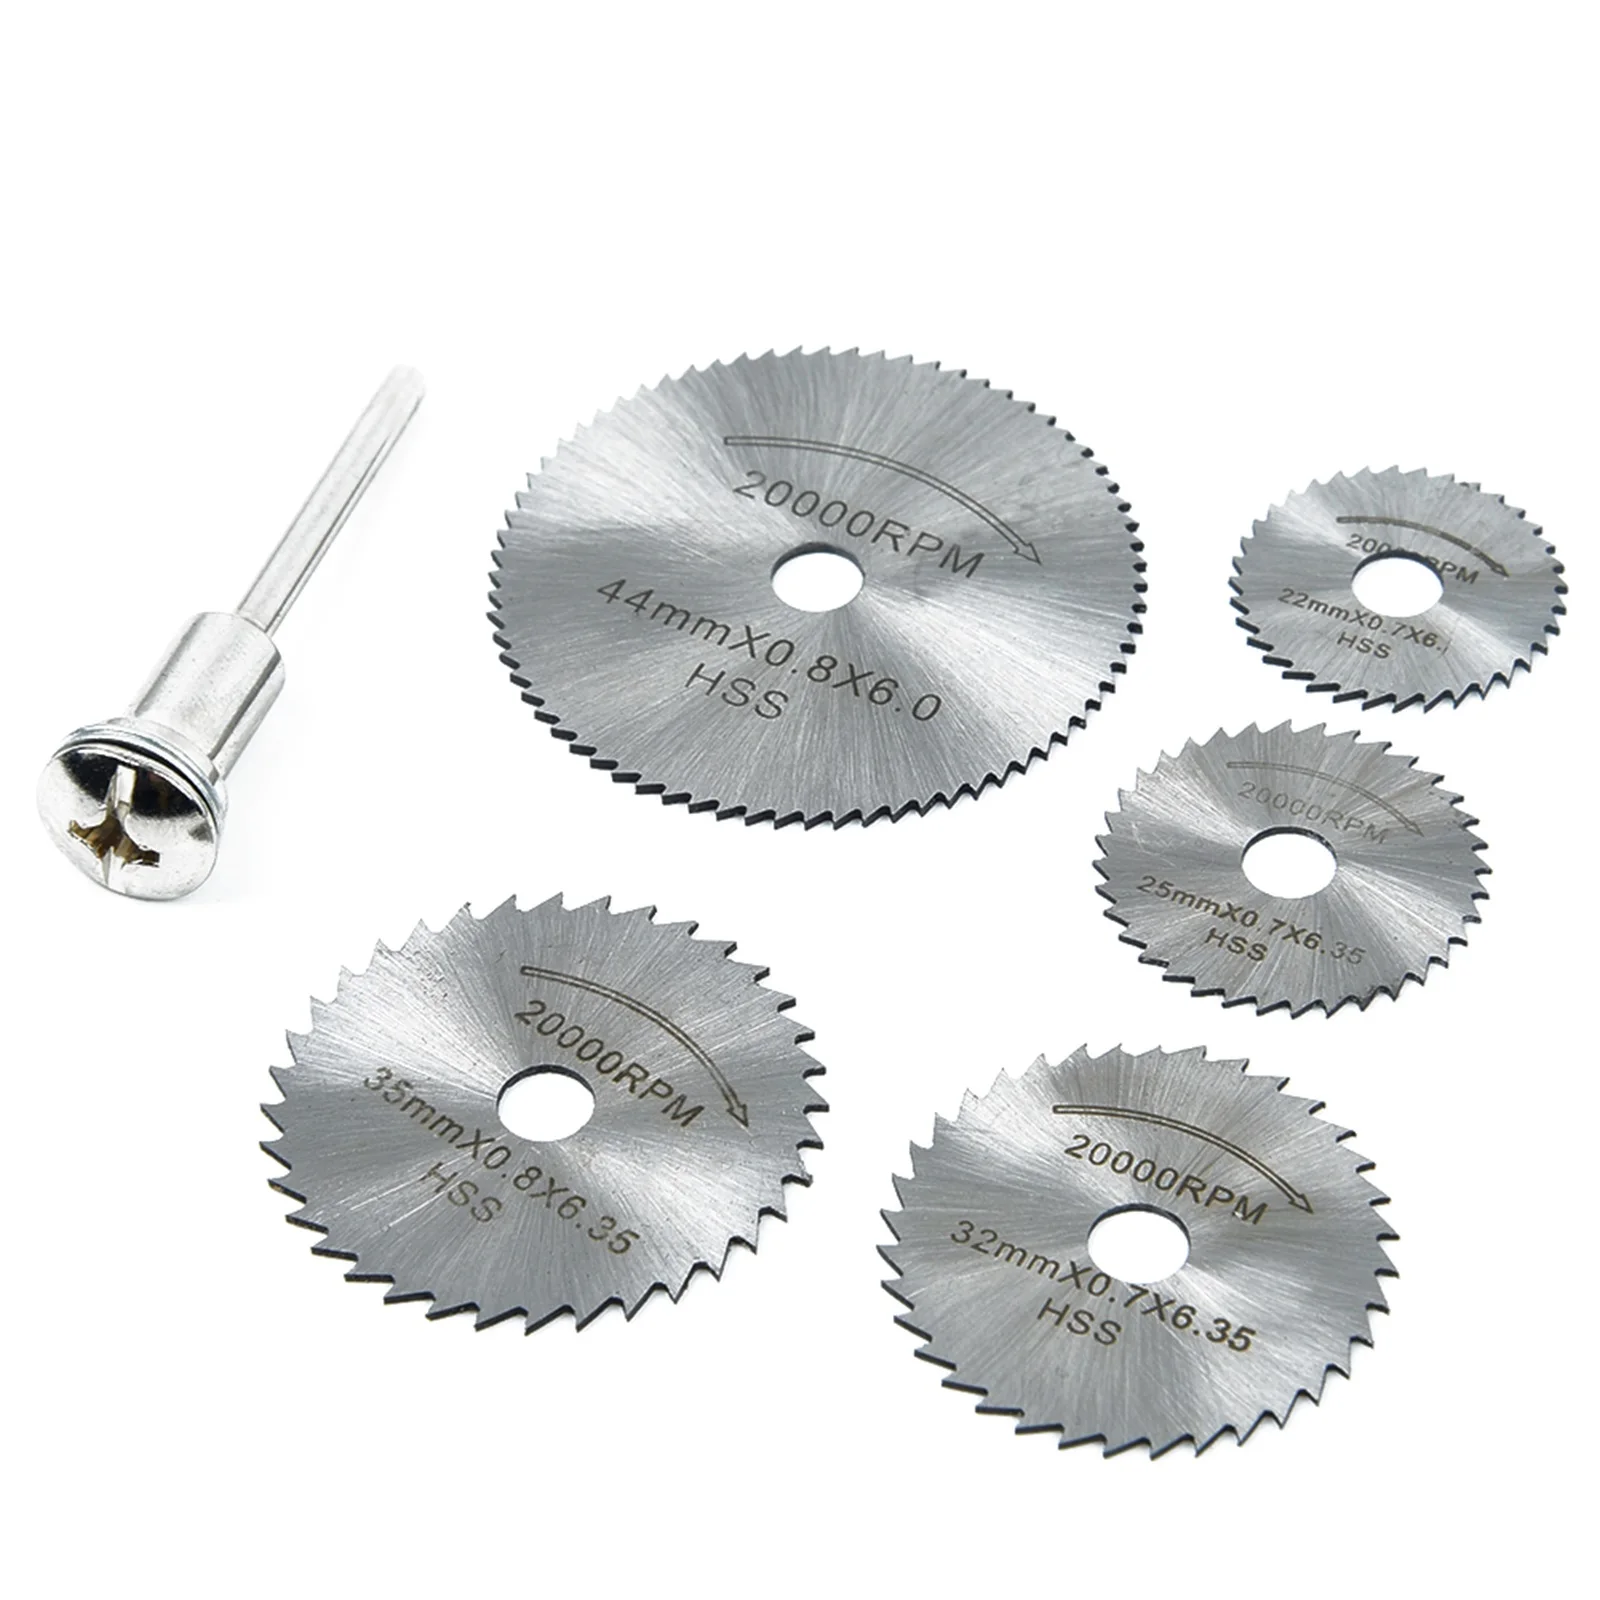 

HSS Cutting Disc Rotary Tool Accessories Compatialble For Wood Plastic Cutting High Speed Steel Circular Saw Blades For Dremel